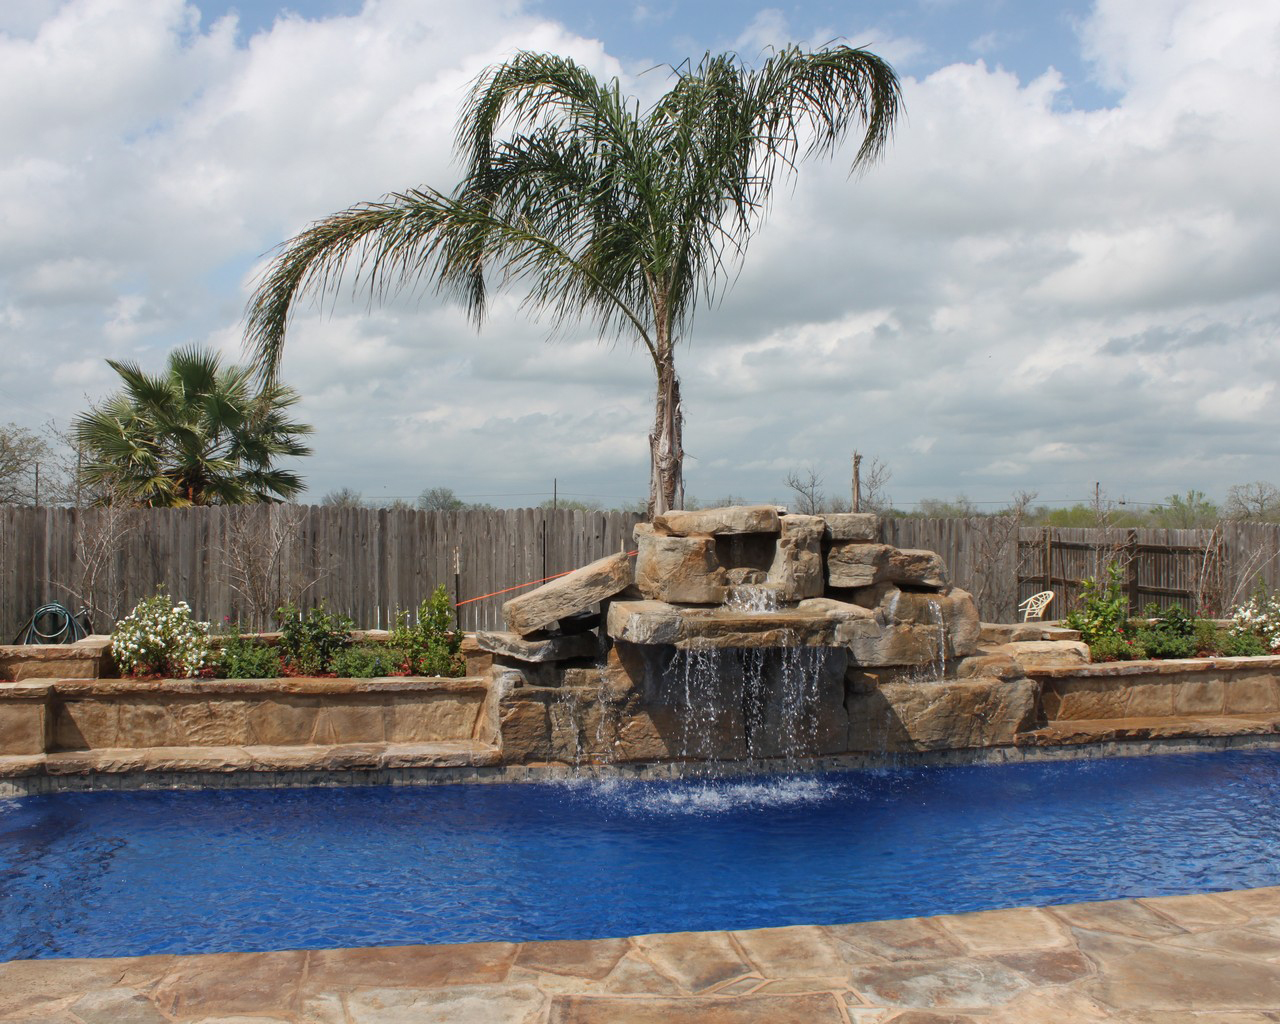 Vegas inground fiberglass pools San Antonio Tx Lonestar Swimming Pool for your own private backyard oasis staycation non-Airbnb at home